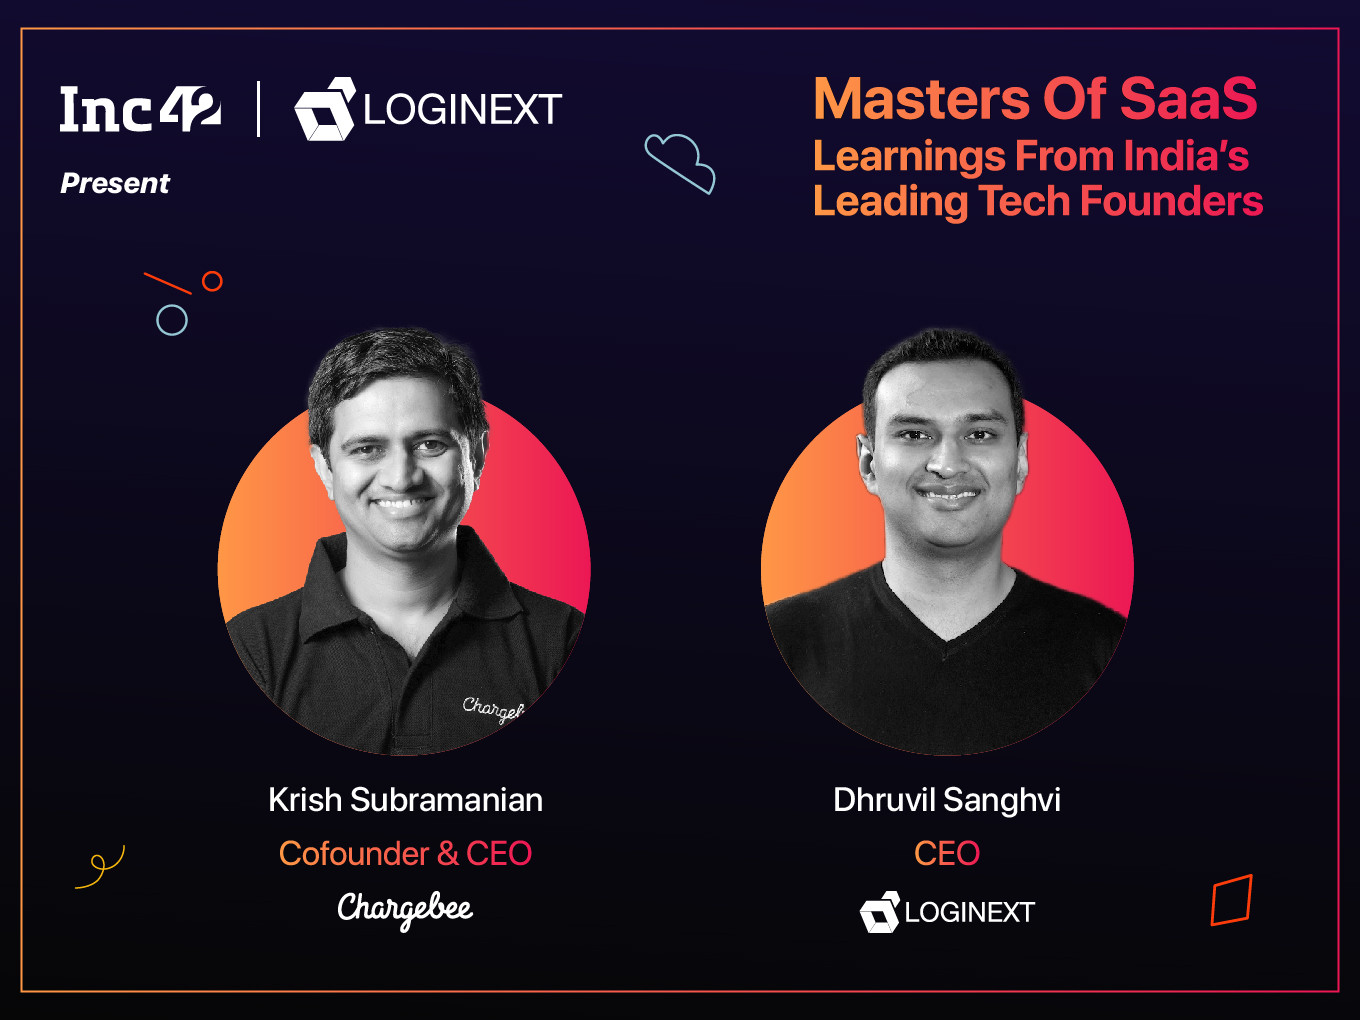 Concluding The Masters Of SaaS Series With Chargebee’s Krish Subramanian | Learnings From Indian Tech Masterminds